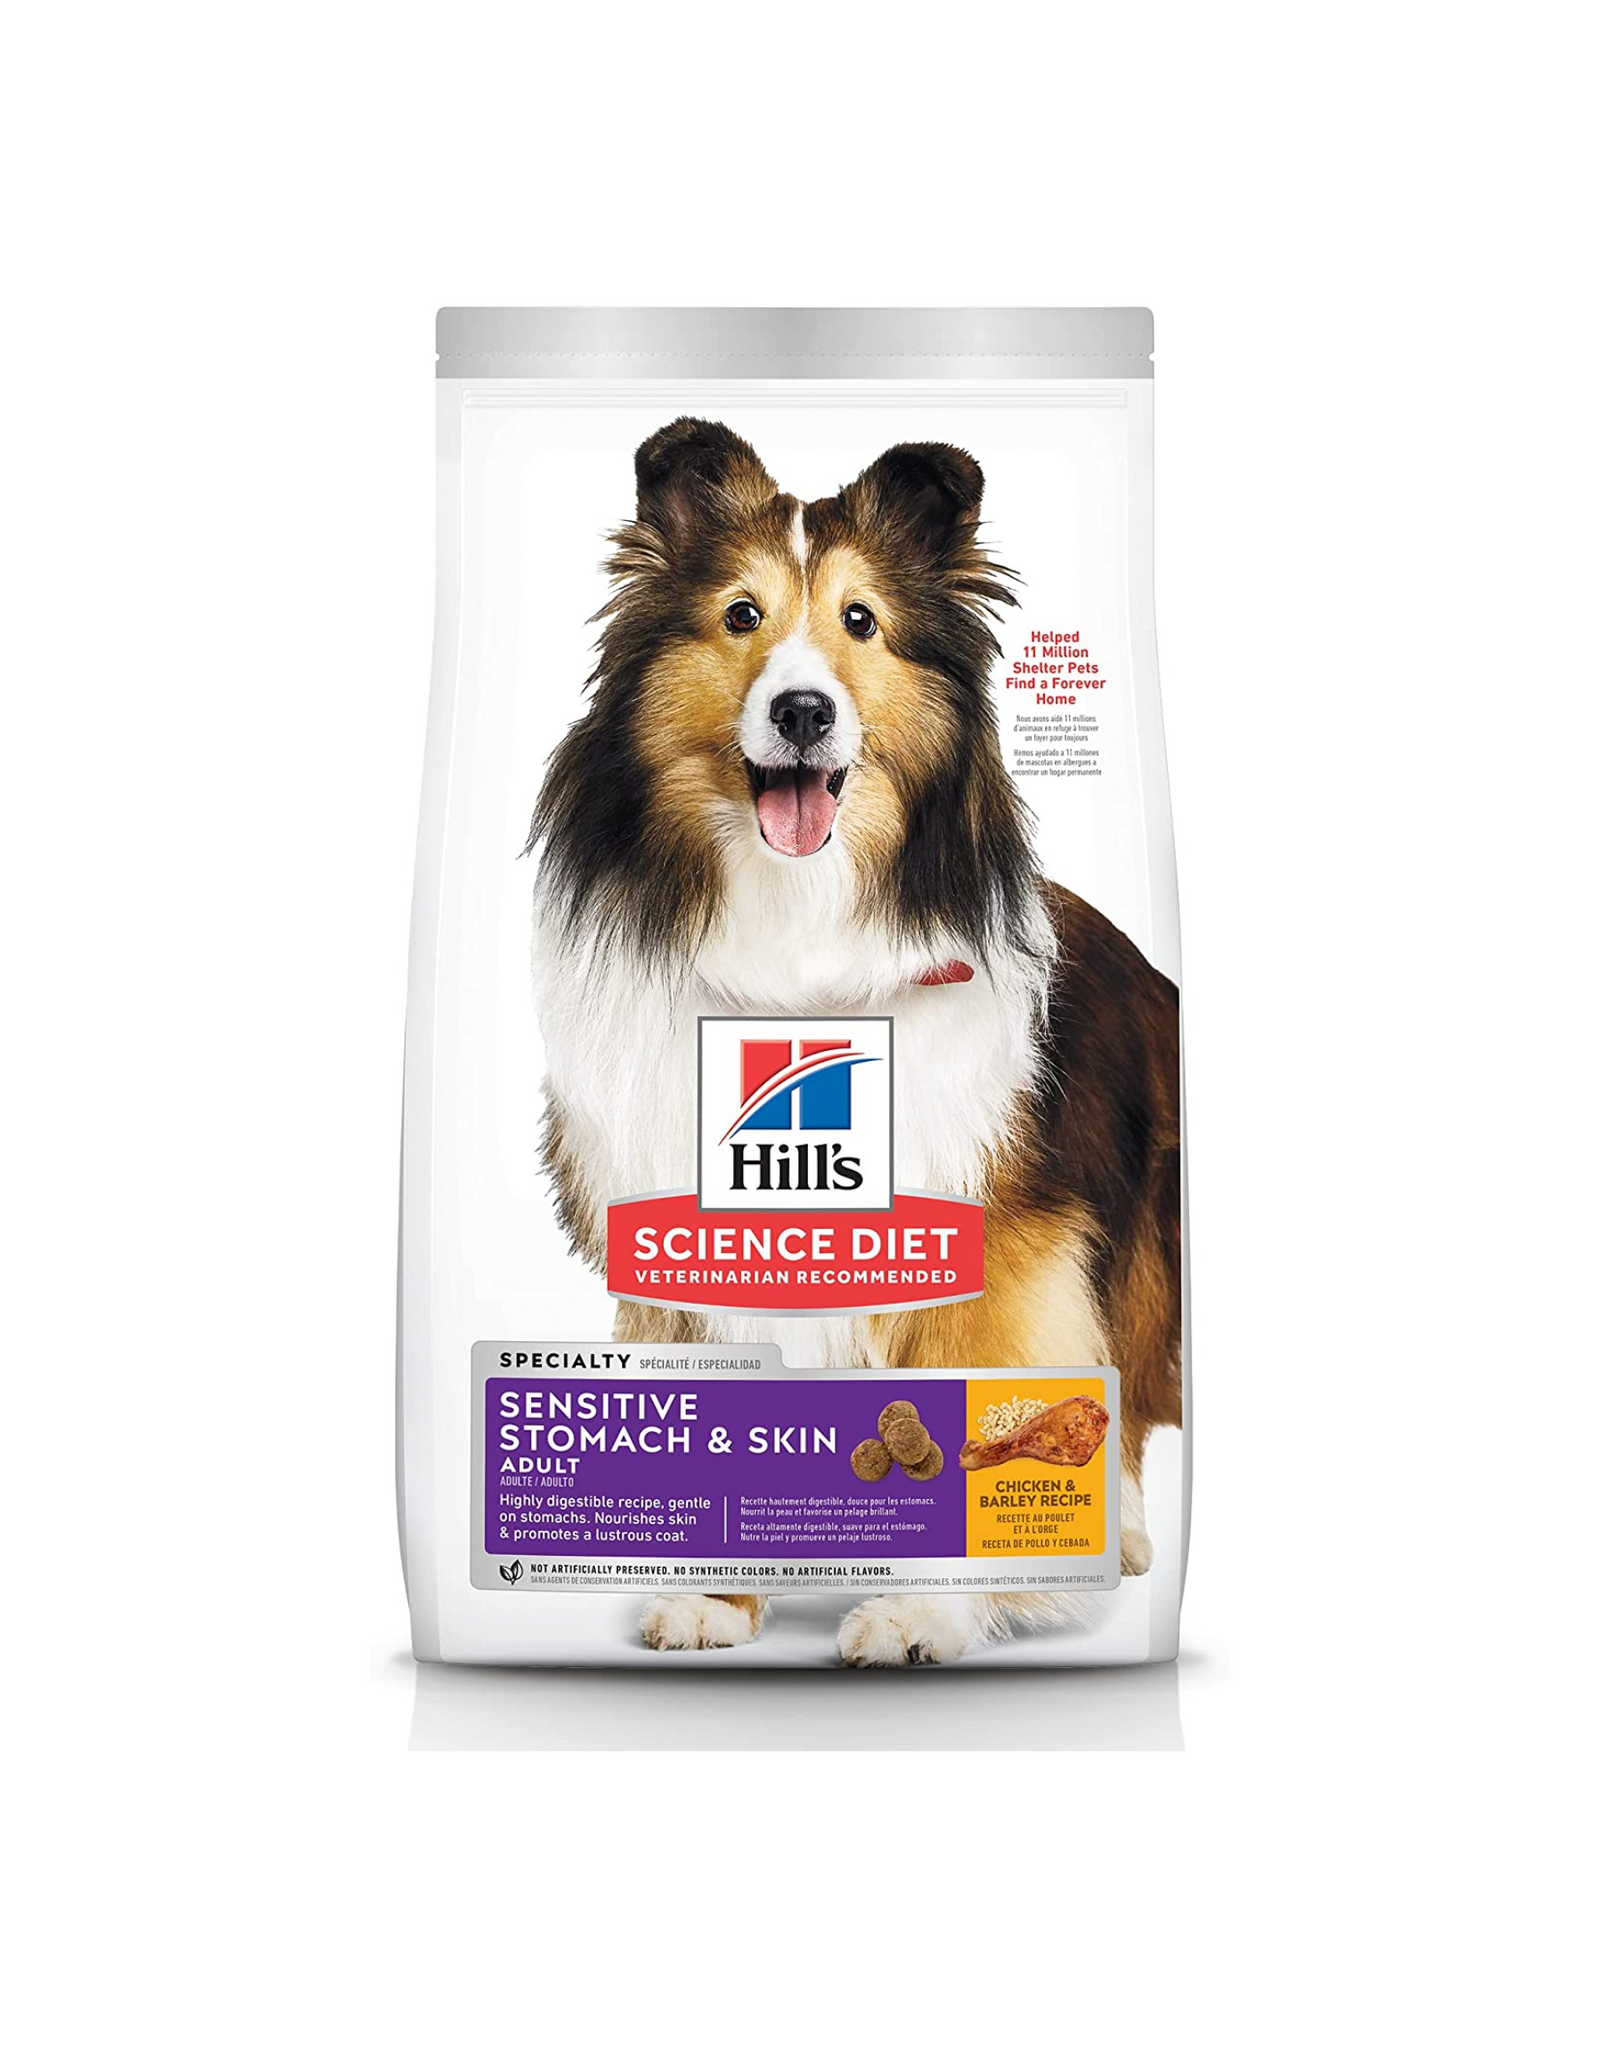 Hill's Science Diet Dog Food, Sensitive Stomach & Skin, Chicken & Barley Recipe, 30 lb. - for Adult